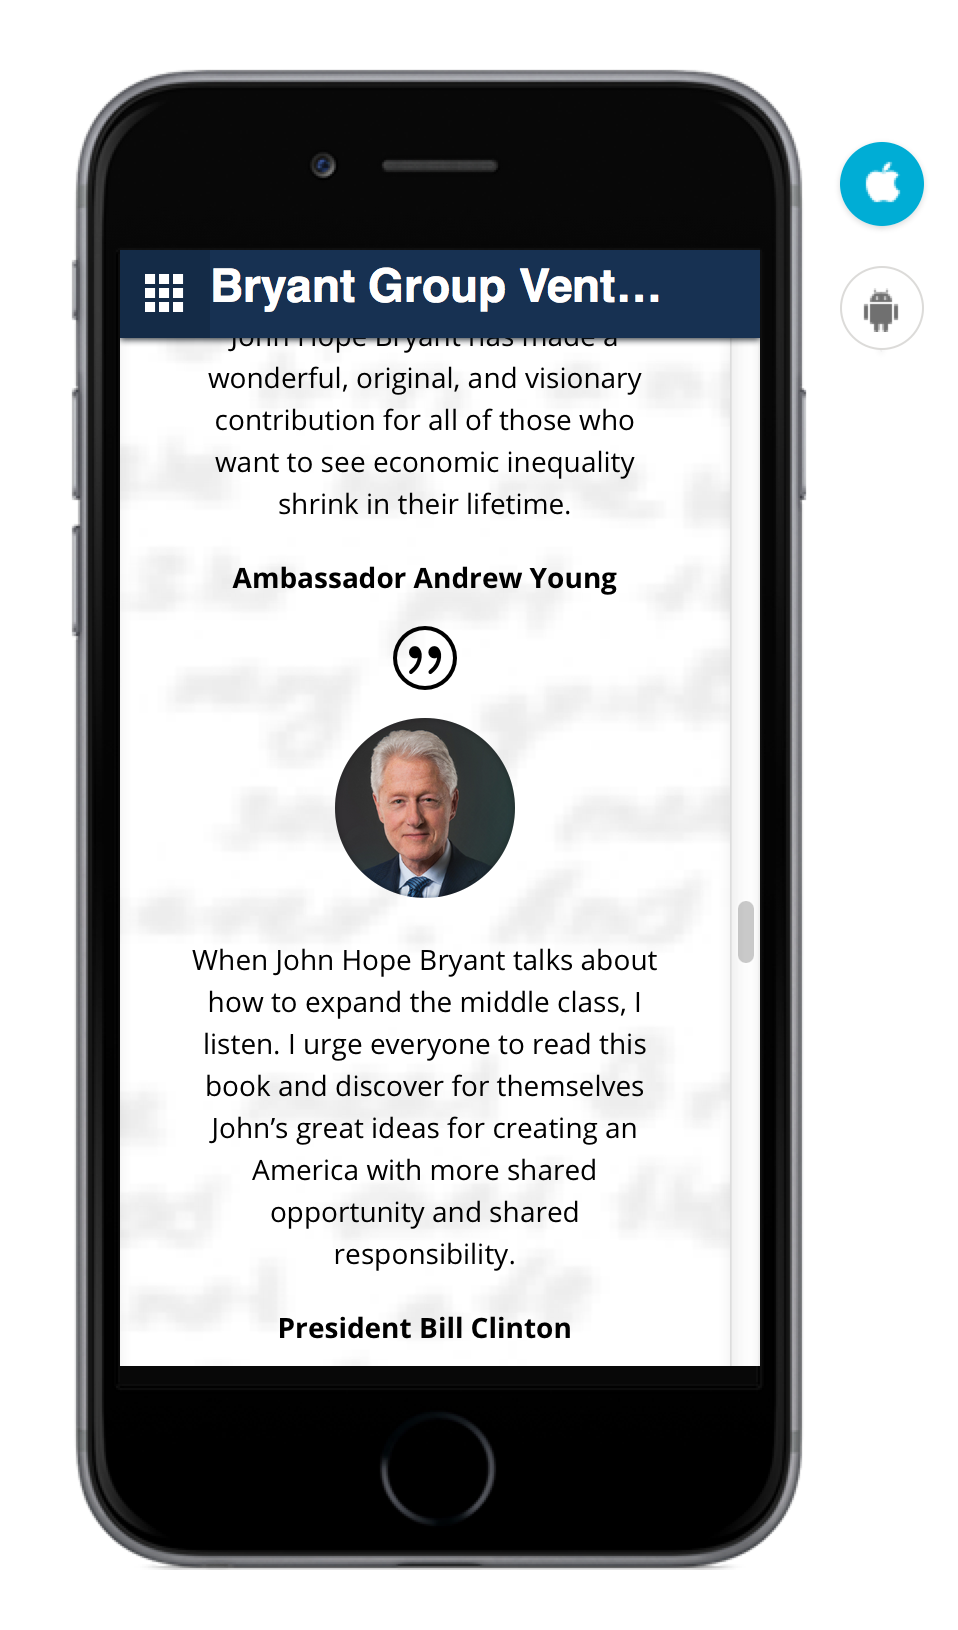 Bryant Group Ventures iOS and Android App Design and Development by Seviant Studios